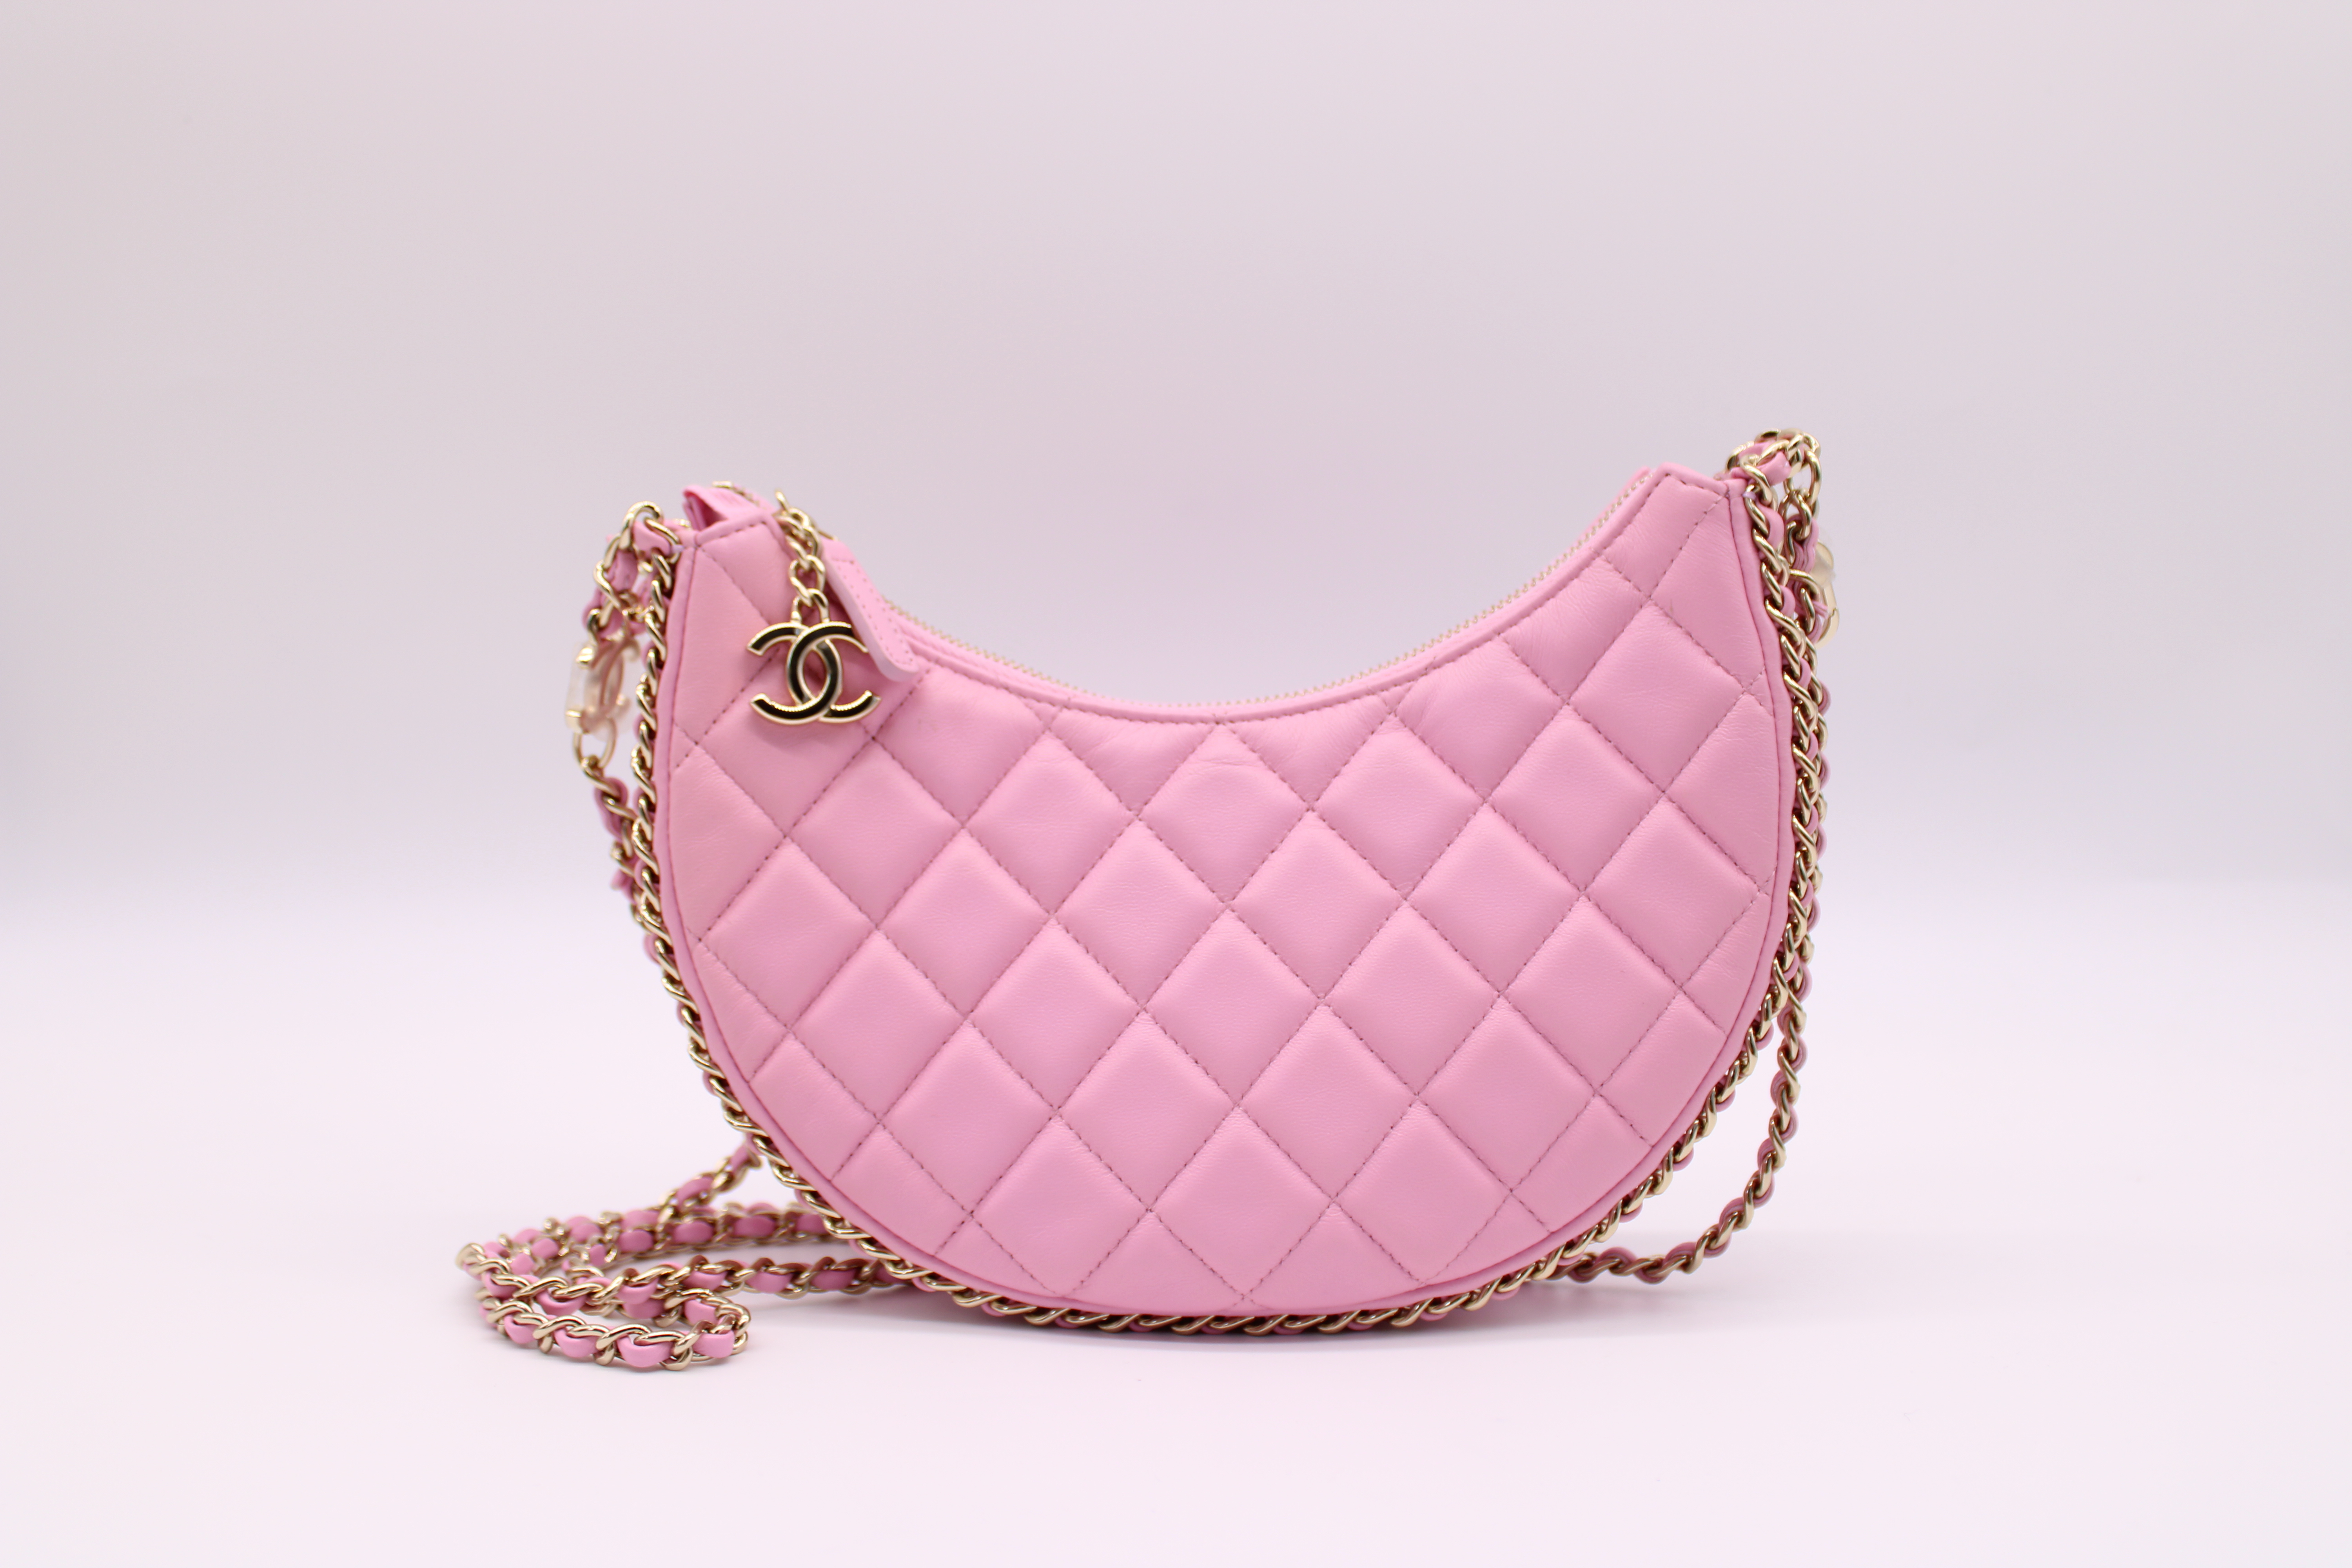 Chanel Small Hobo Bag, Pink Lambskin Leather, Gold Hardware